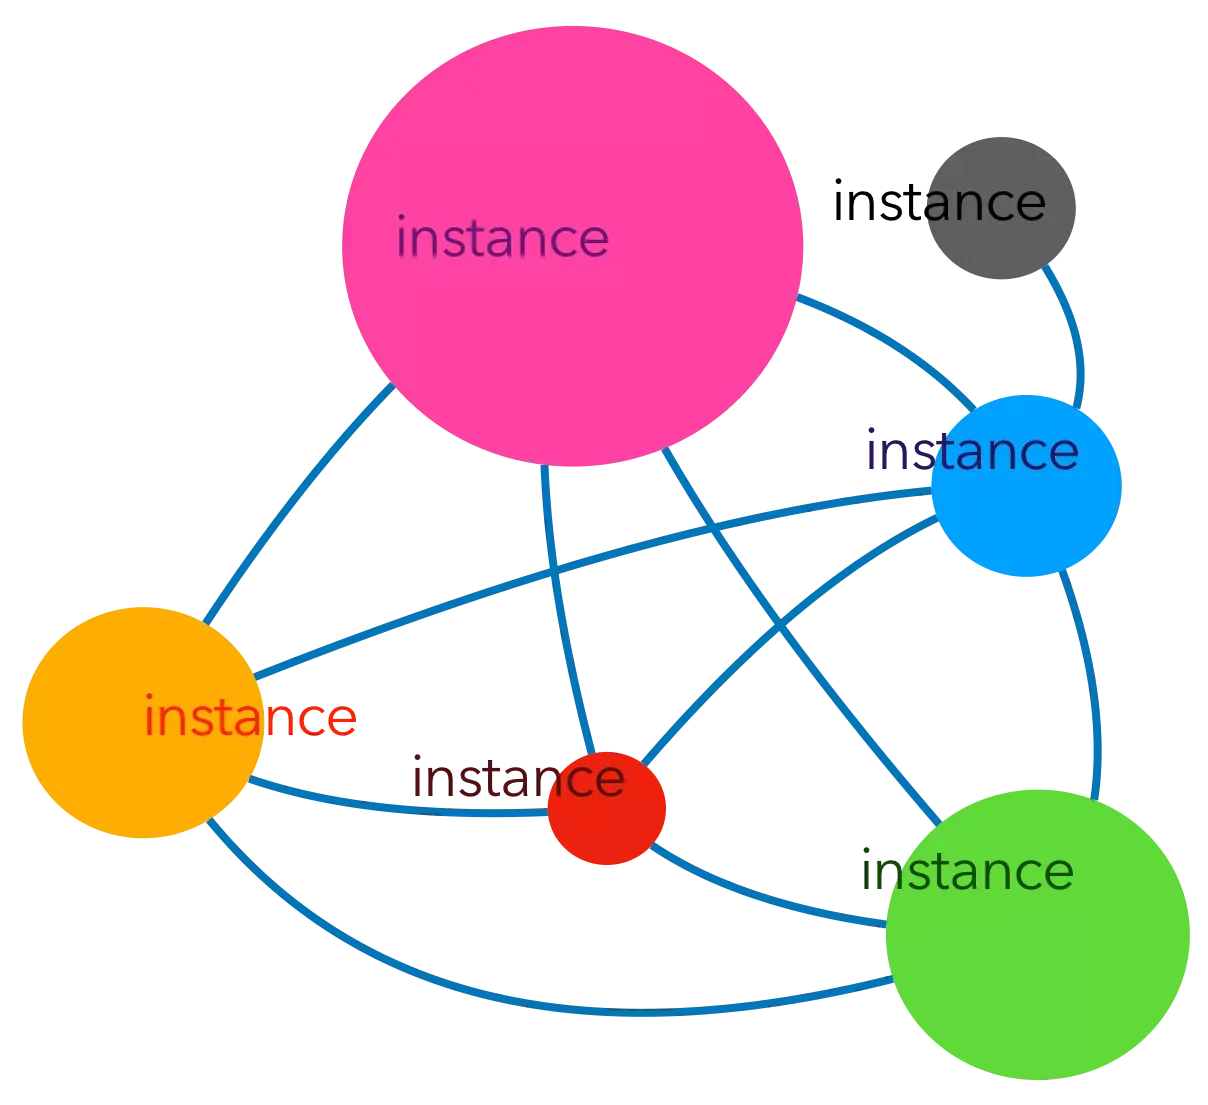 Illustration of a network of instances, symbolized by colorful circles and lines drawn between them.